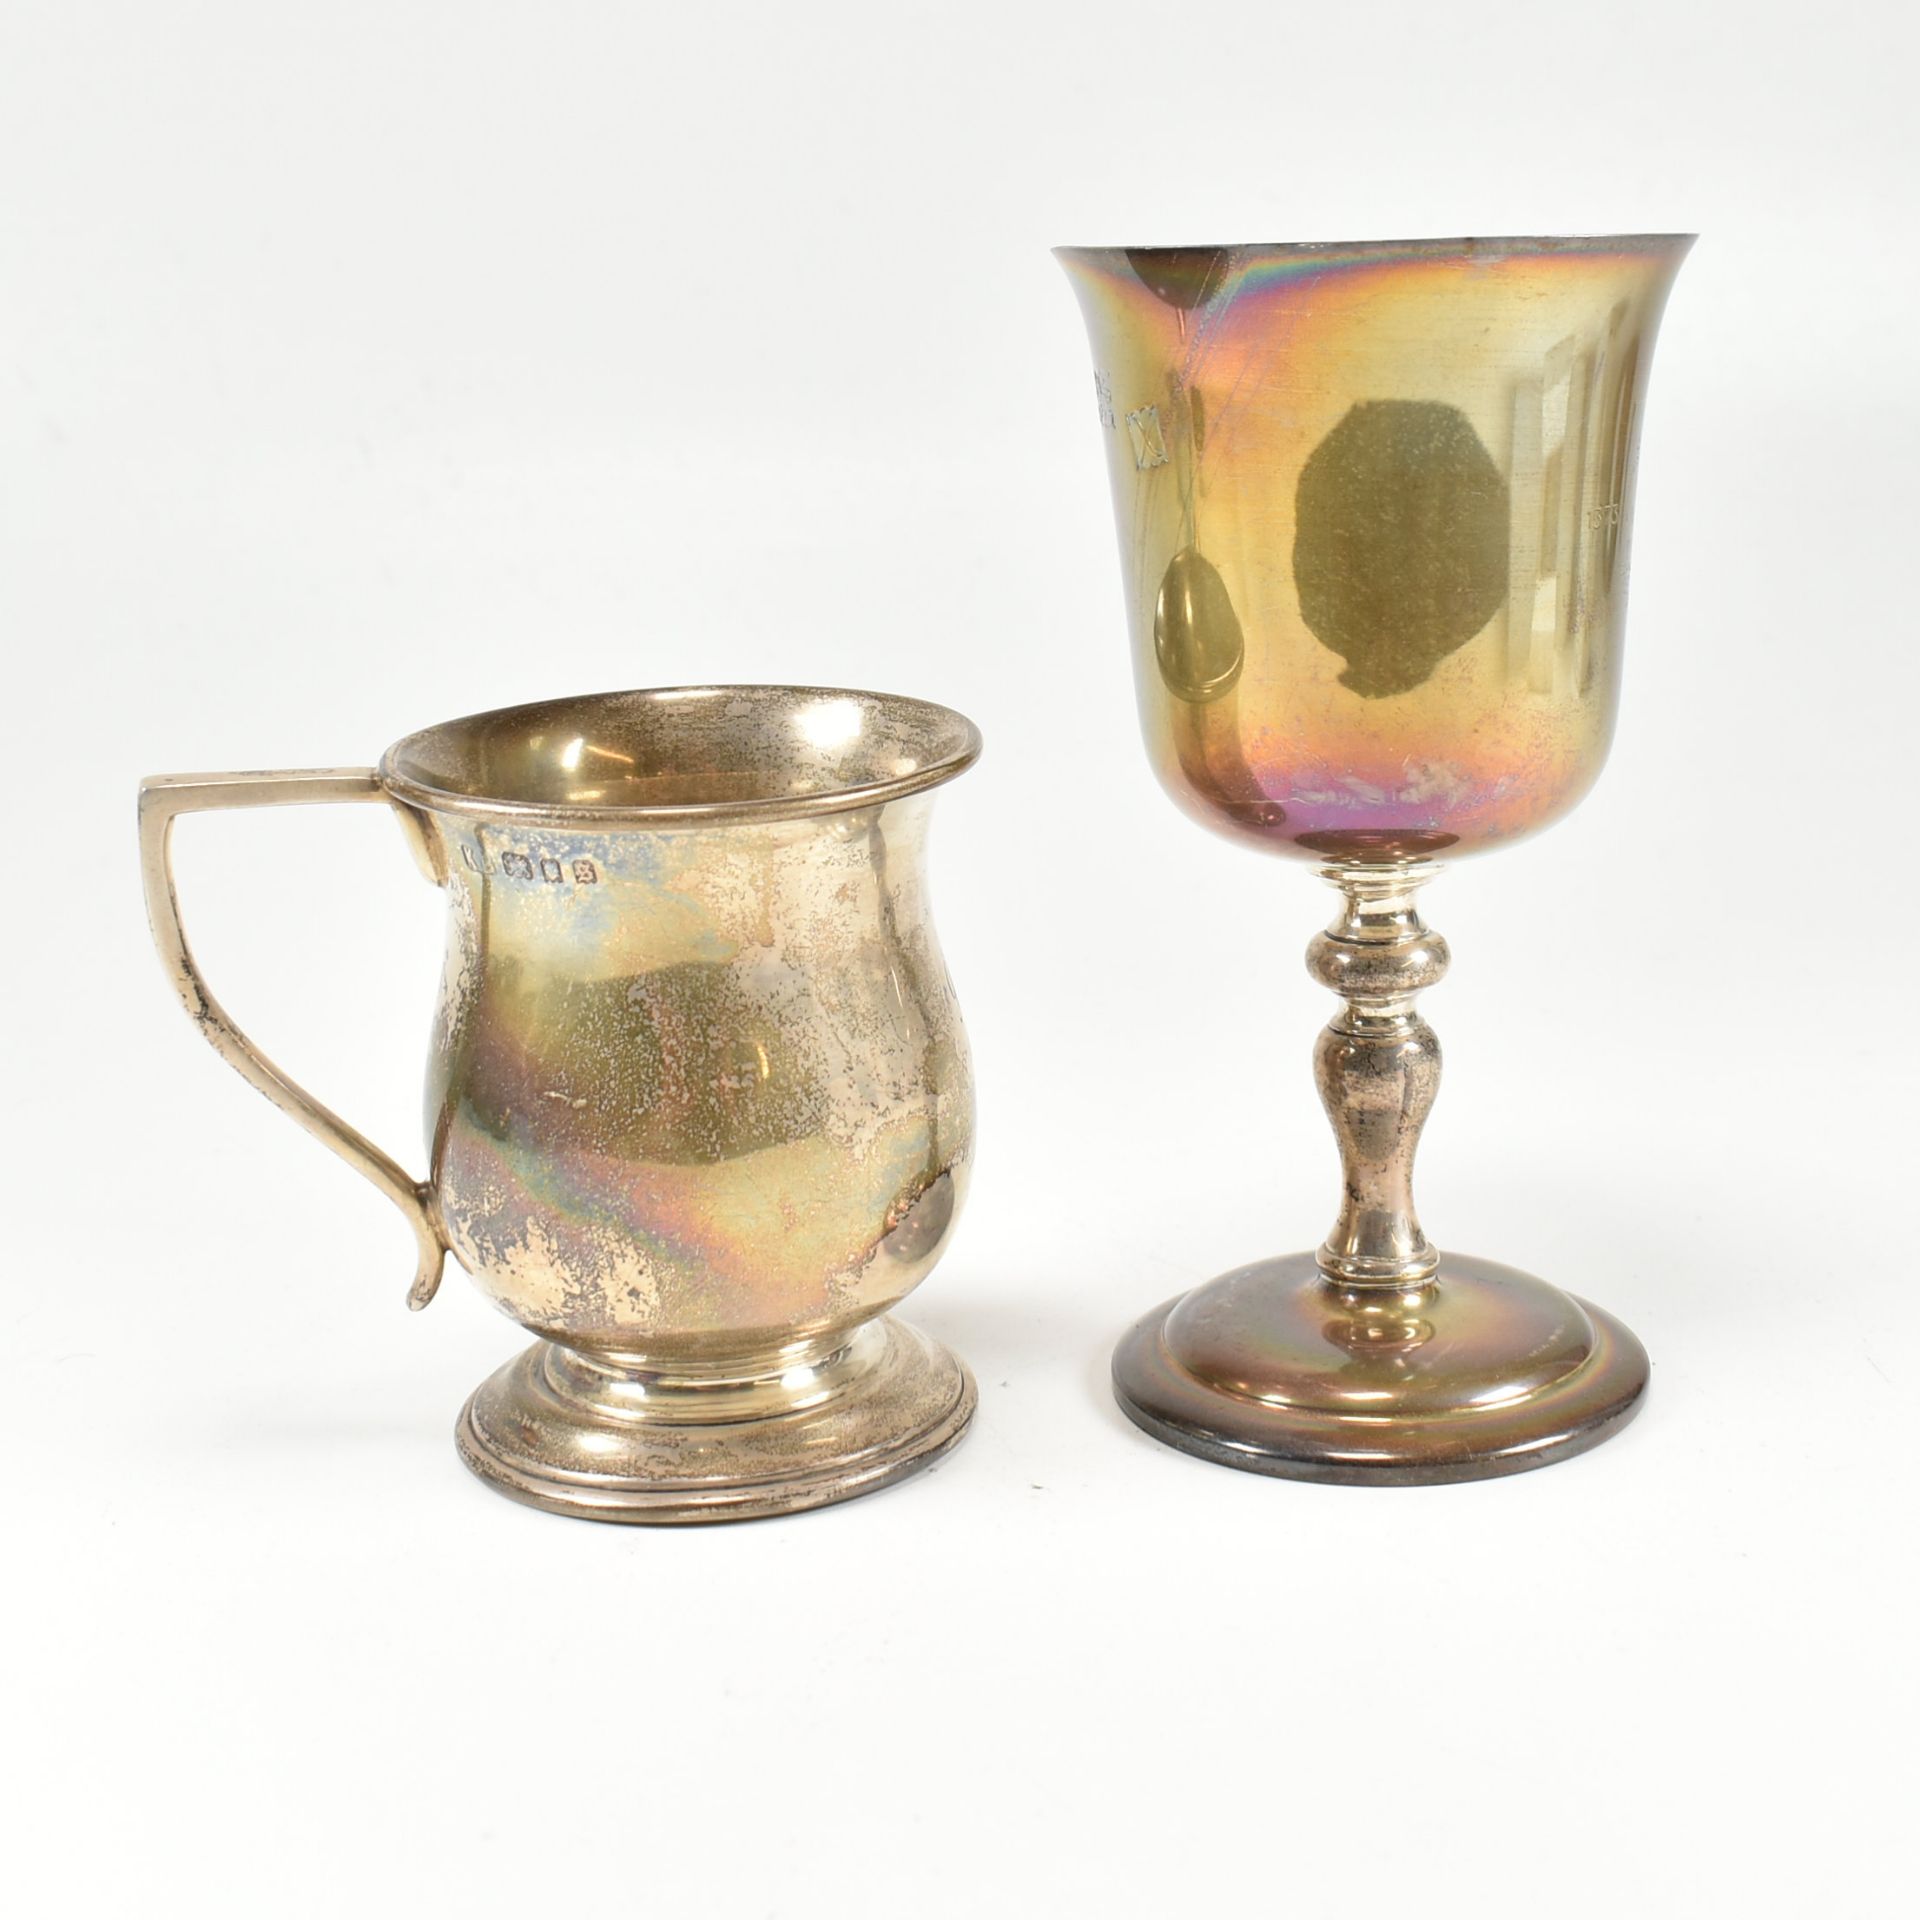 GEORGE V HALLMARKED SILVER CHRISTENING CUP & LATER GOBLET - Image 4 of 8